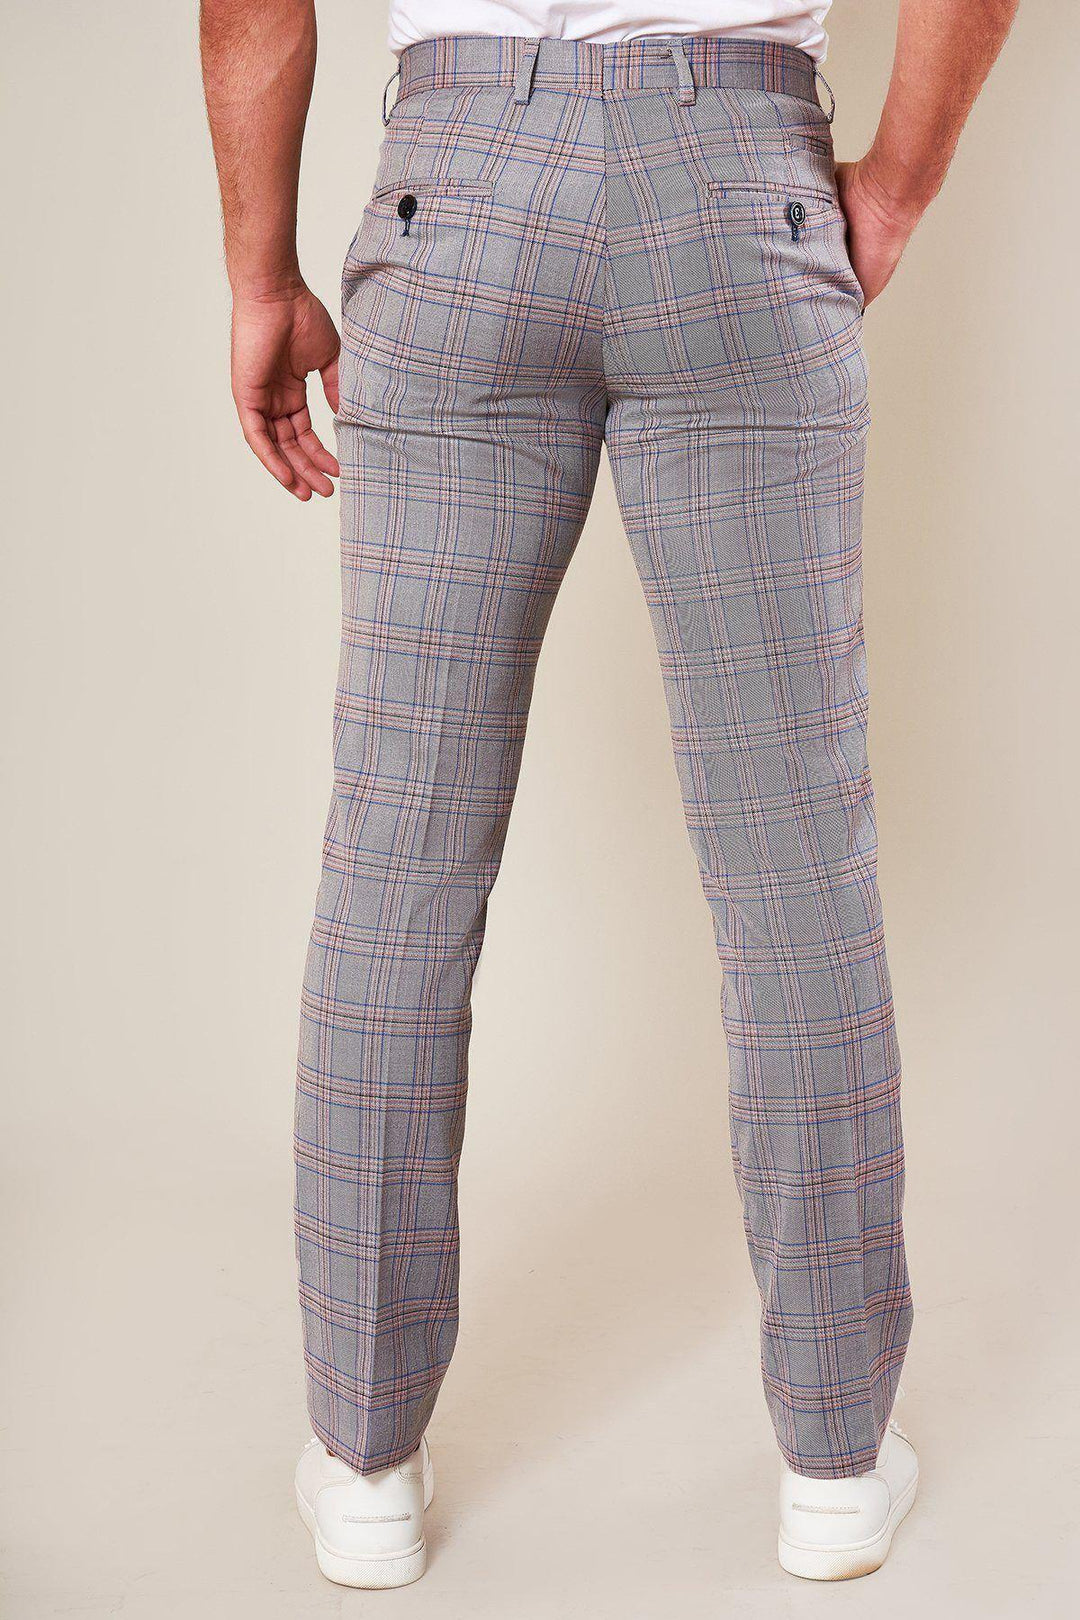 ALVIN - Grey Pink Check Trousers